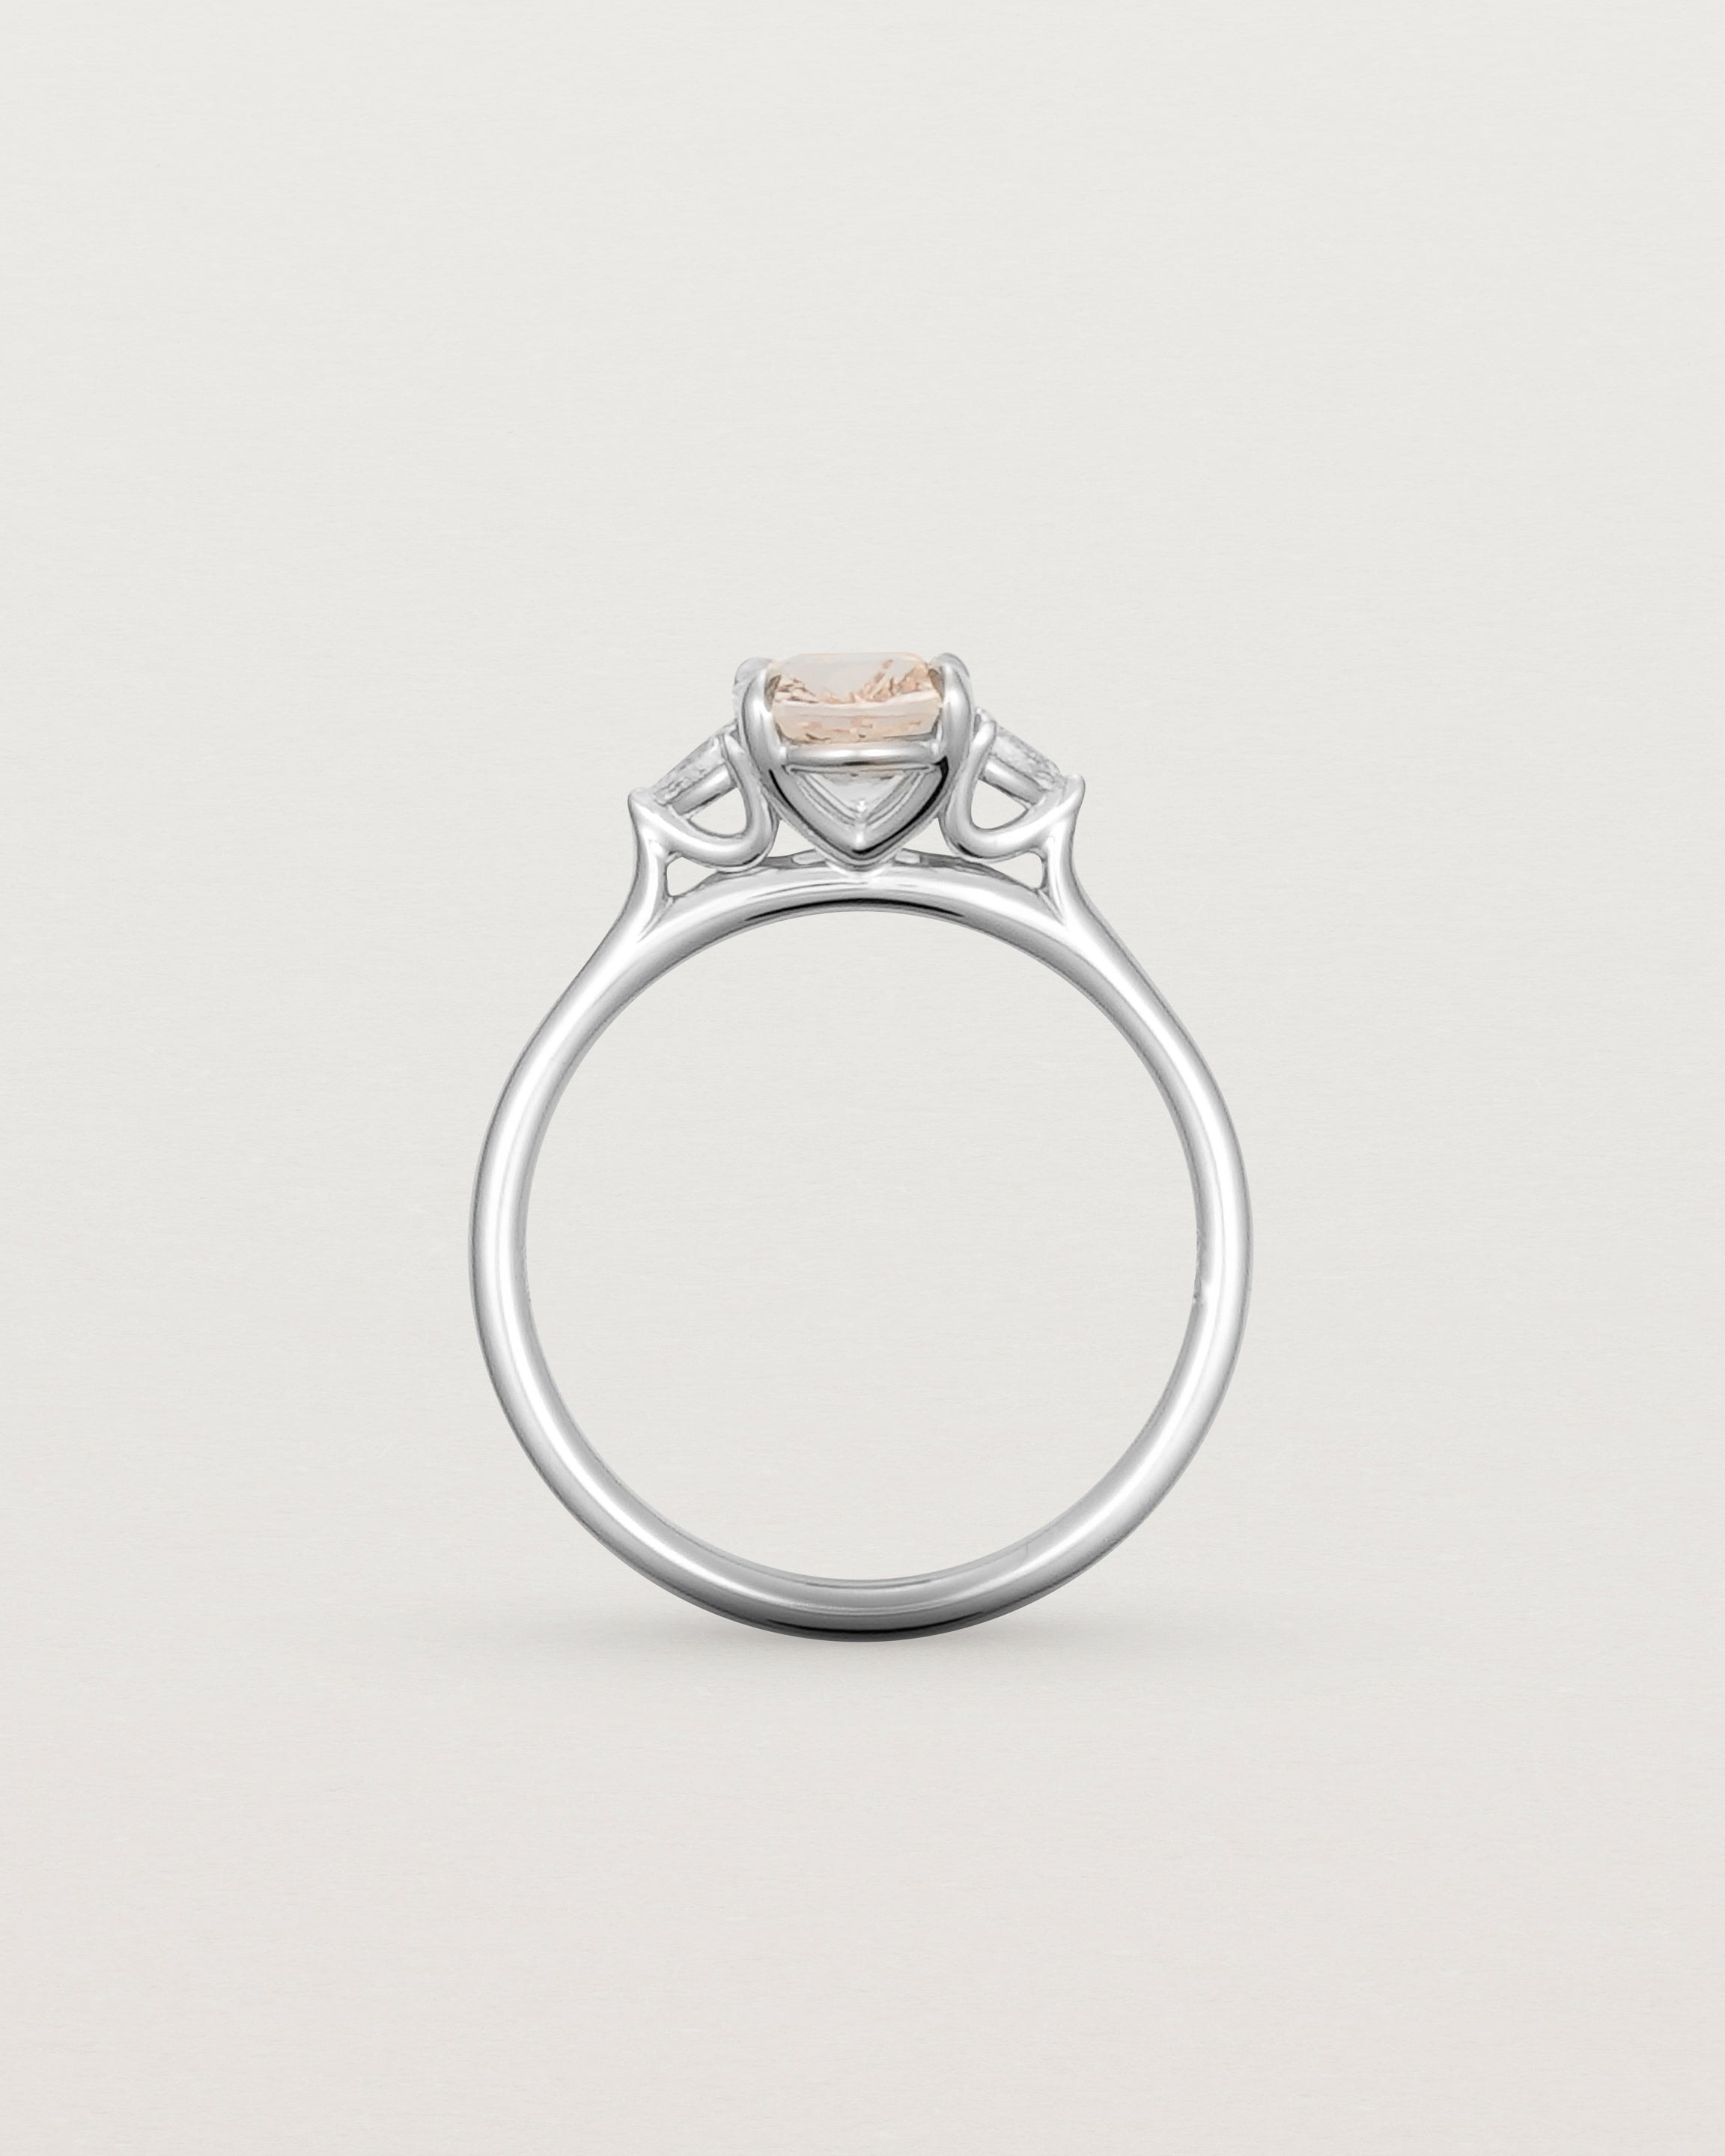 The side profile of an oval morganite adorned with two white diamonds either side, featuring a sweeping setting and crafted in white gold